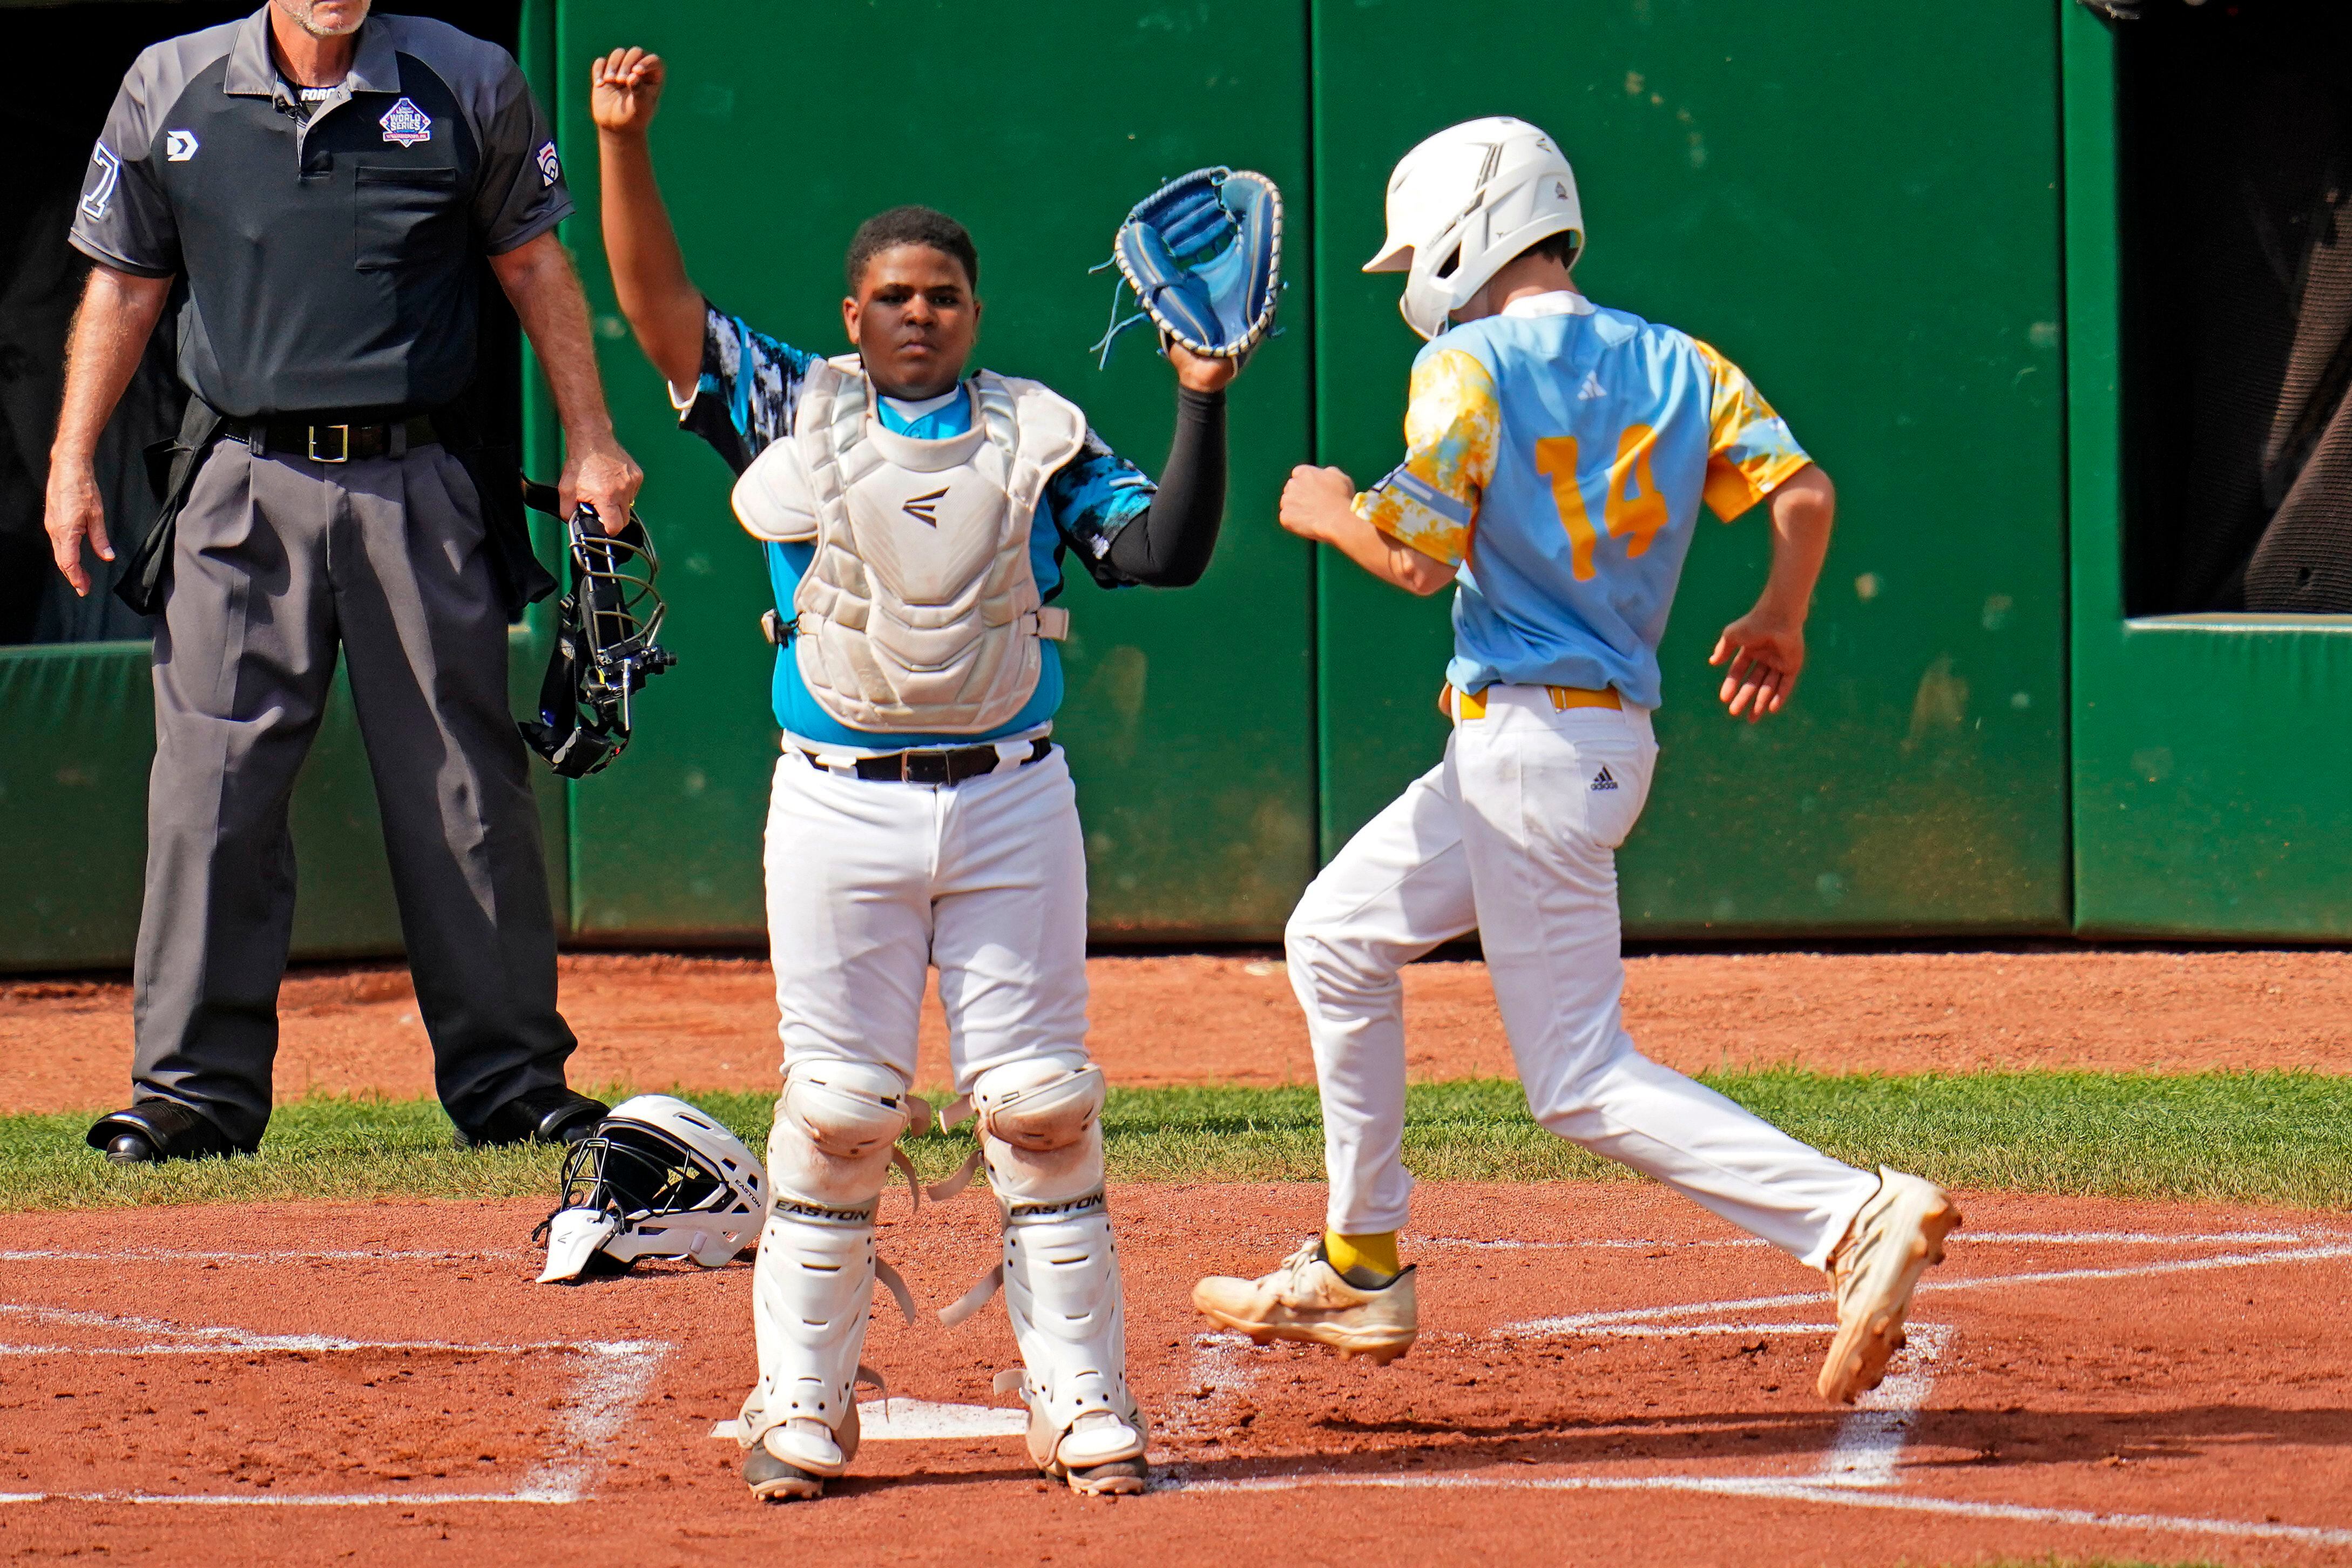 With Dramatic Homer, Team from SoCal Beats Curacao to Win Little